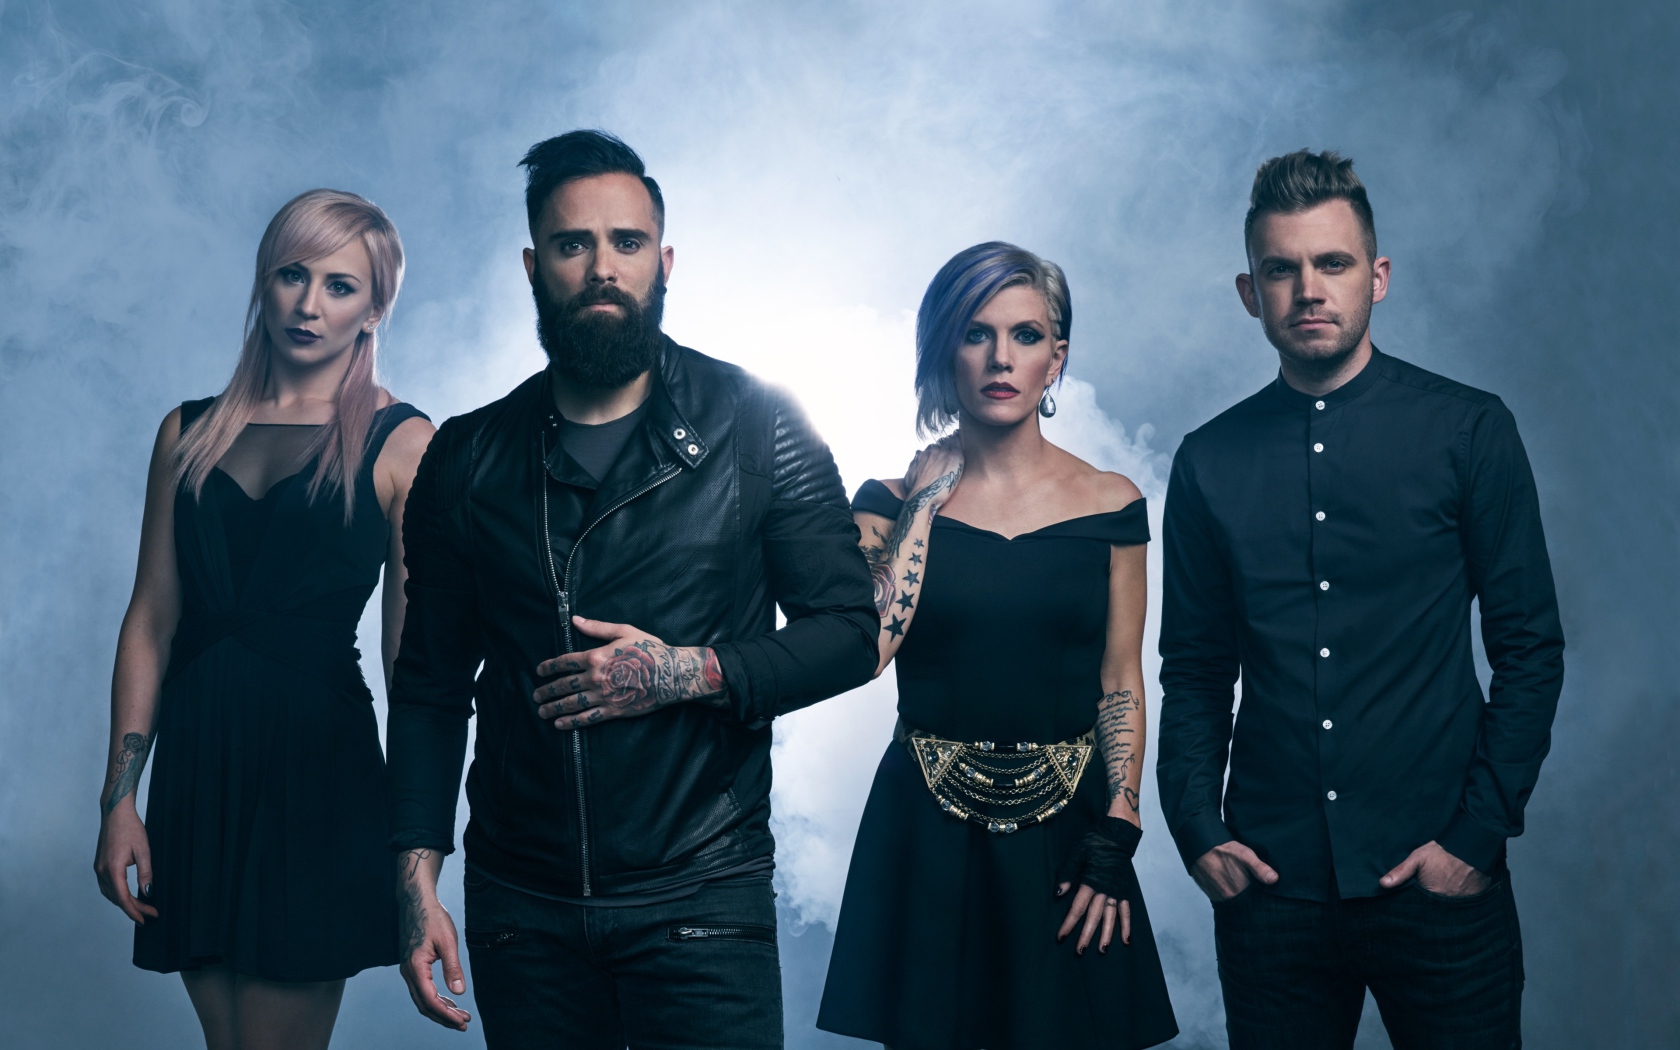 American rock band Skillet in black outfits